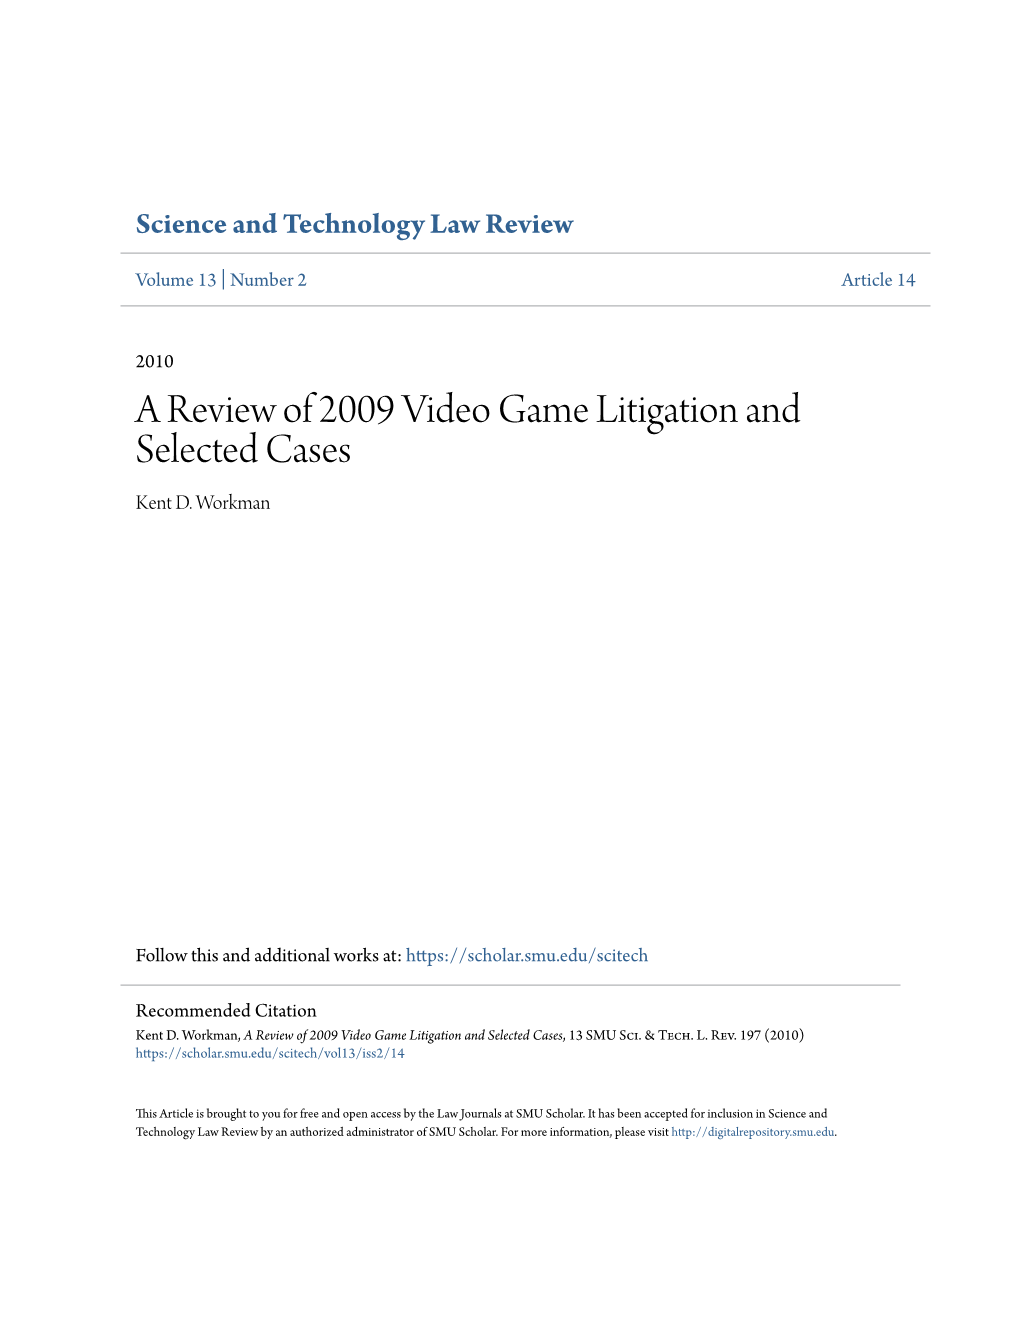 A Review of 2009 Video Game Litigation and Selected Cases Kent D